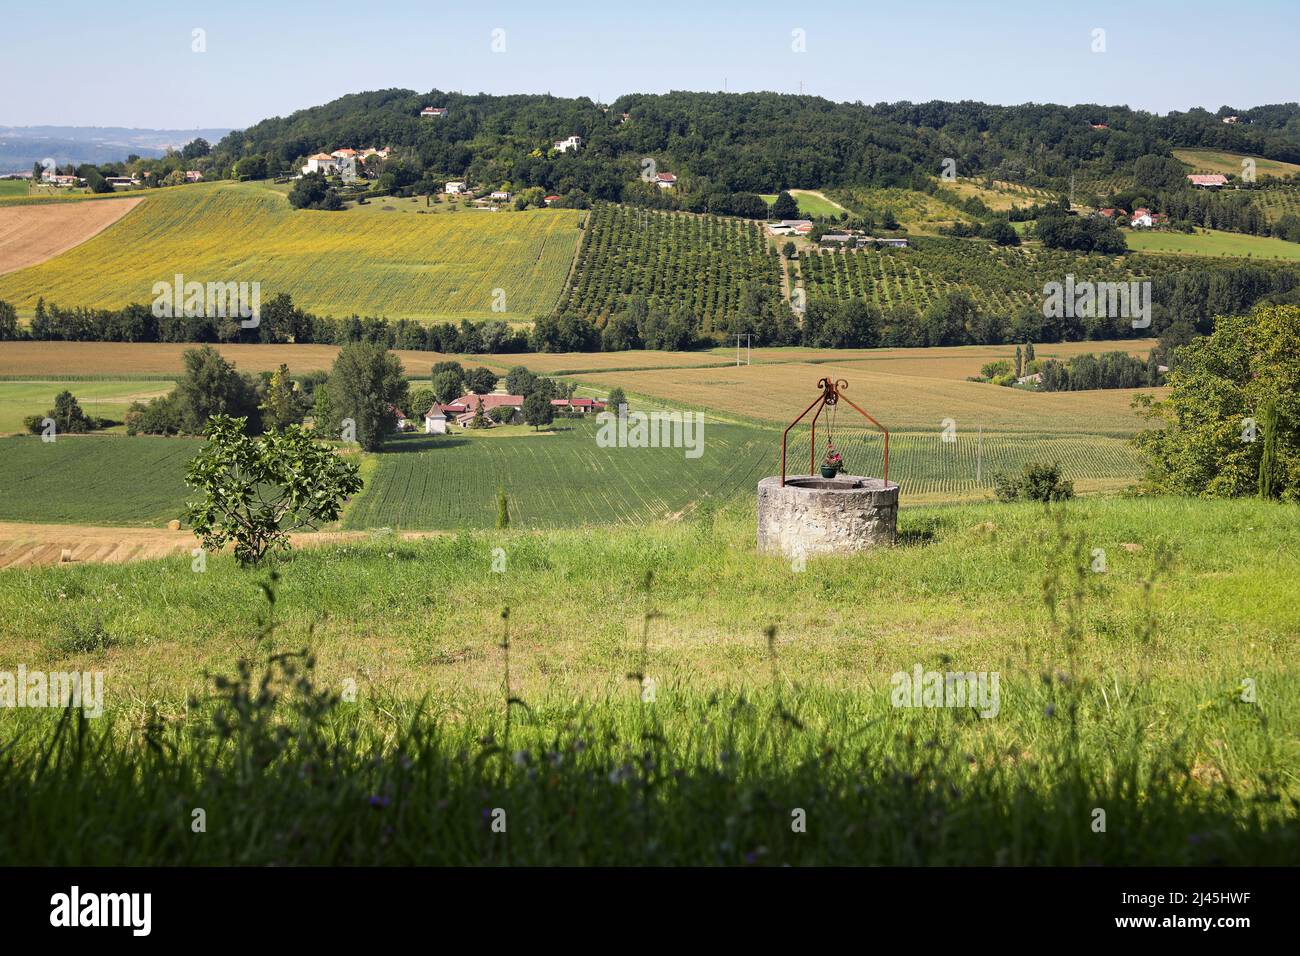 Dolmayrac (south-western France): agricultural landscape with a well viewed from the bastide (fortified medieval town) Stock Photo